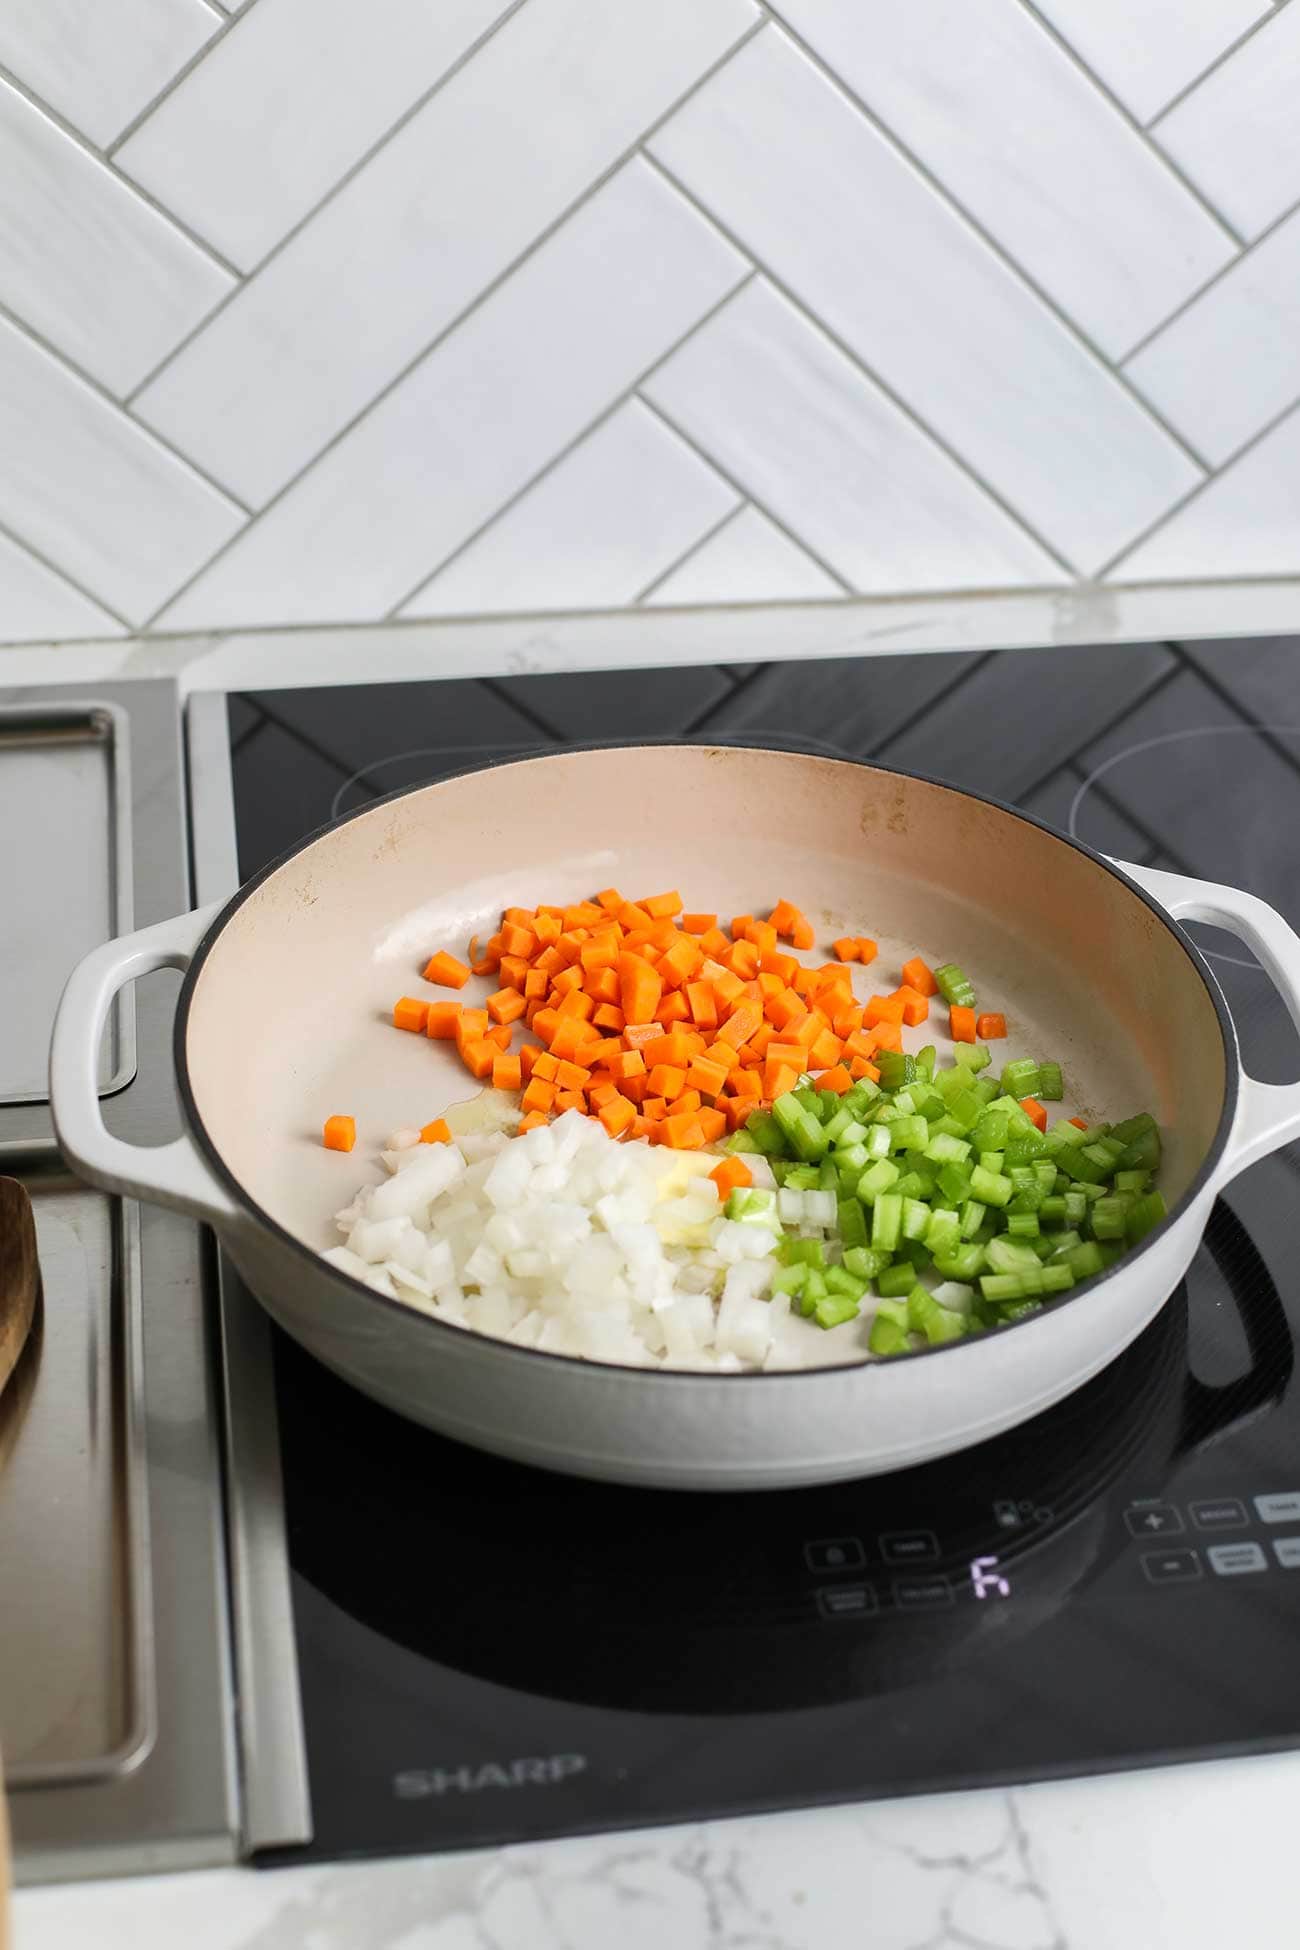 The onions, carrots and celery shown in a large skillet.